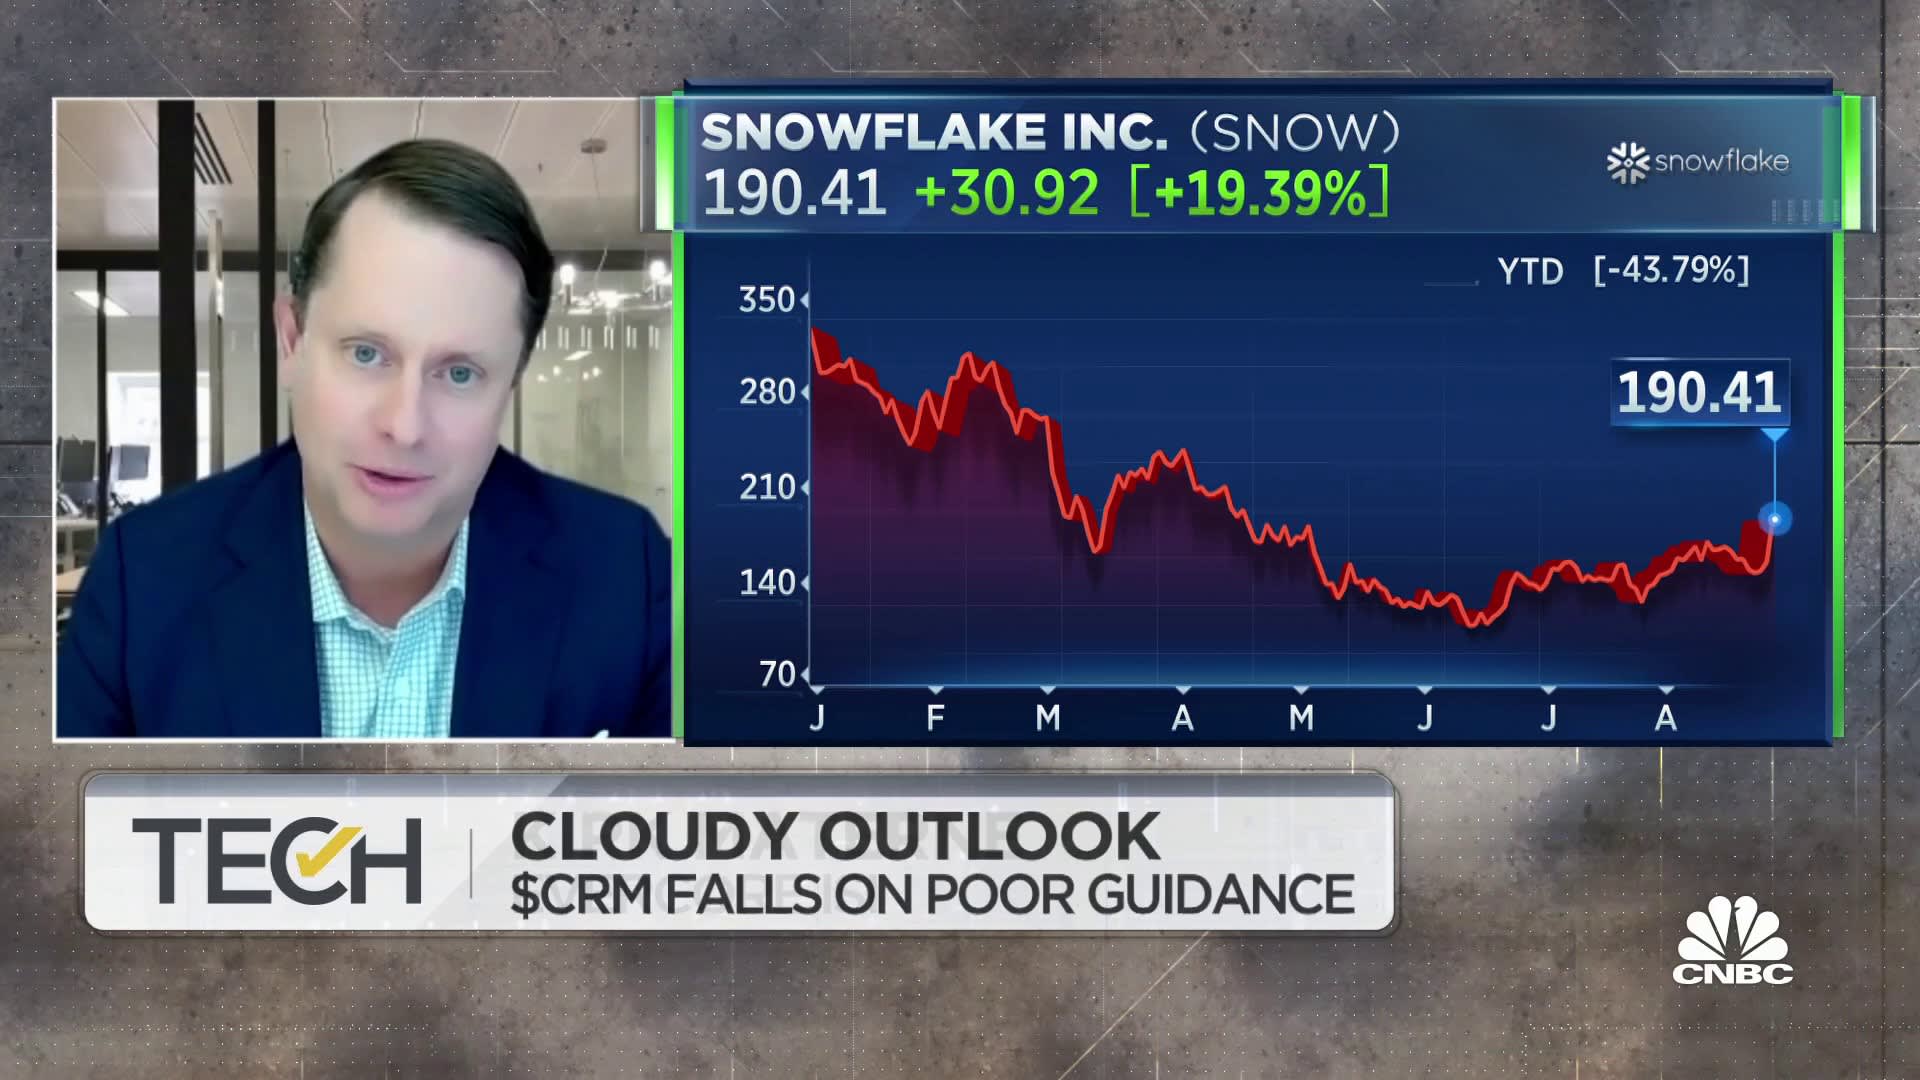 Deal cycles and valuations may lead to fall cloud sector rally, says Evercore's Kirk Materne